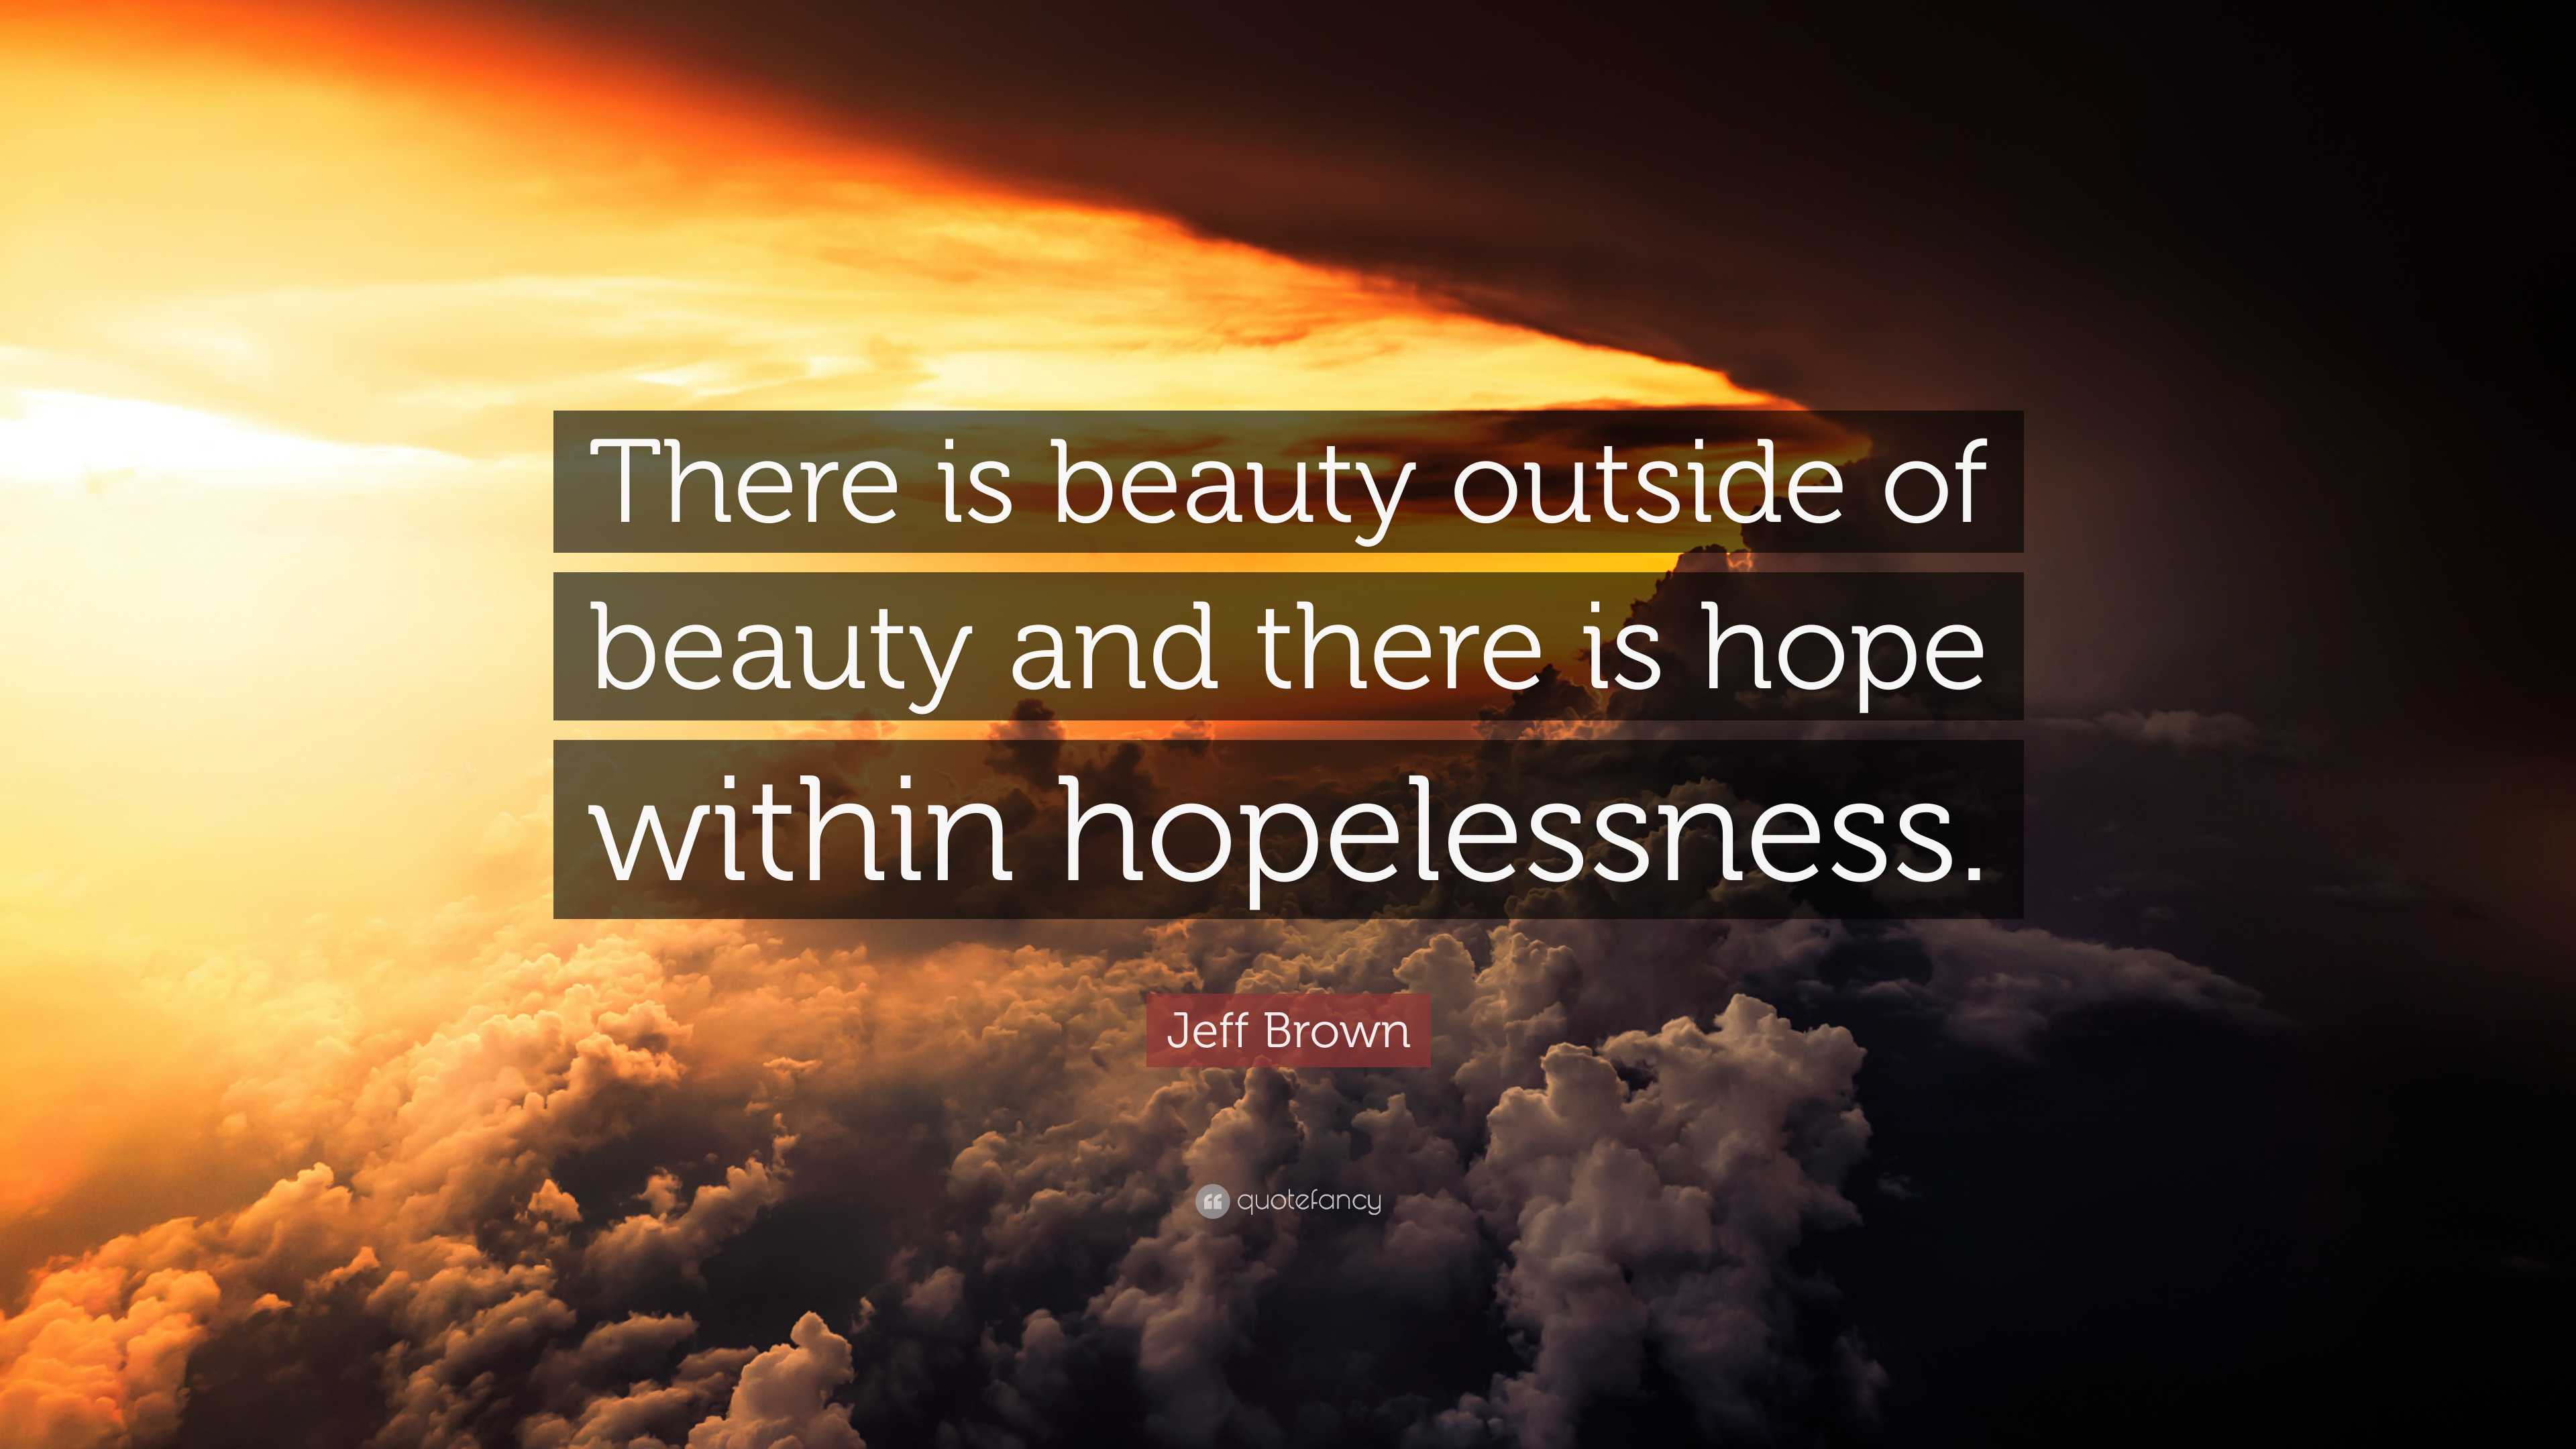 Jeff Brown Quote: “There is beauty outside of beauty and there is hope ...